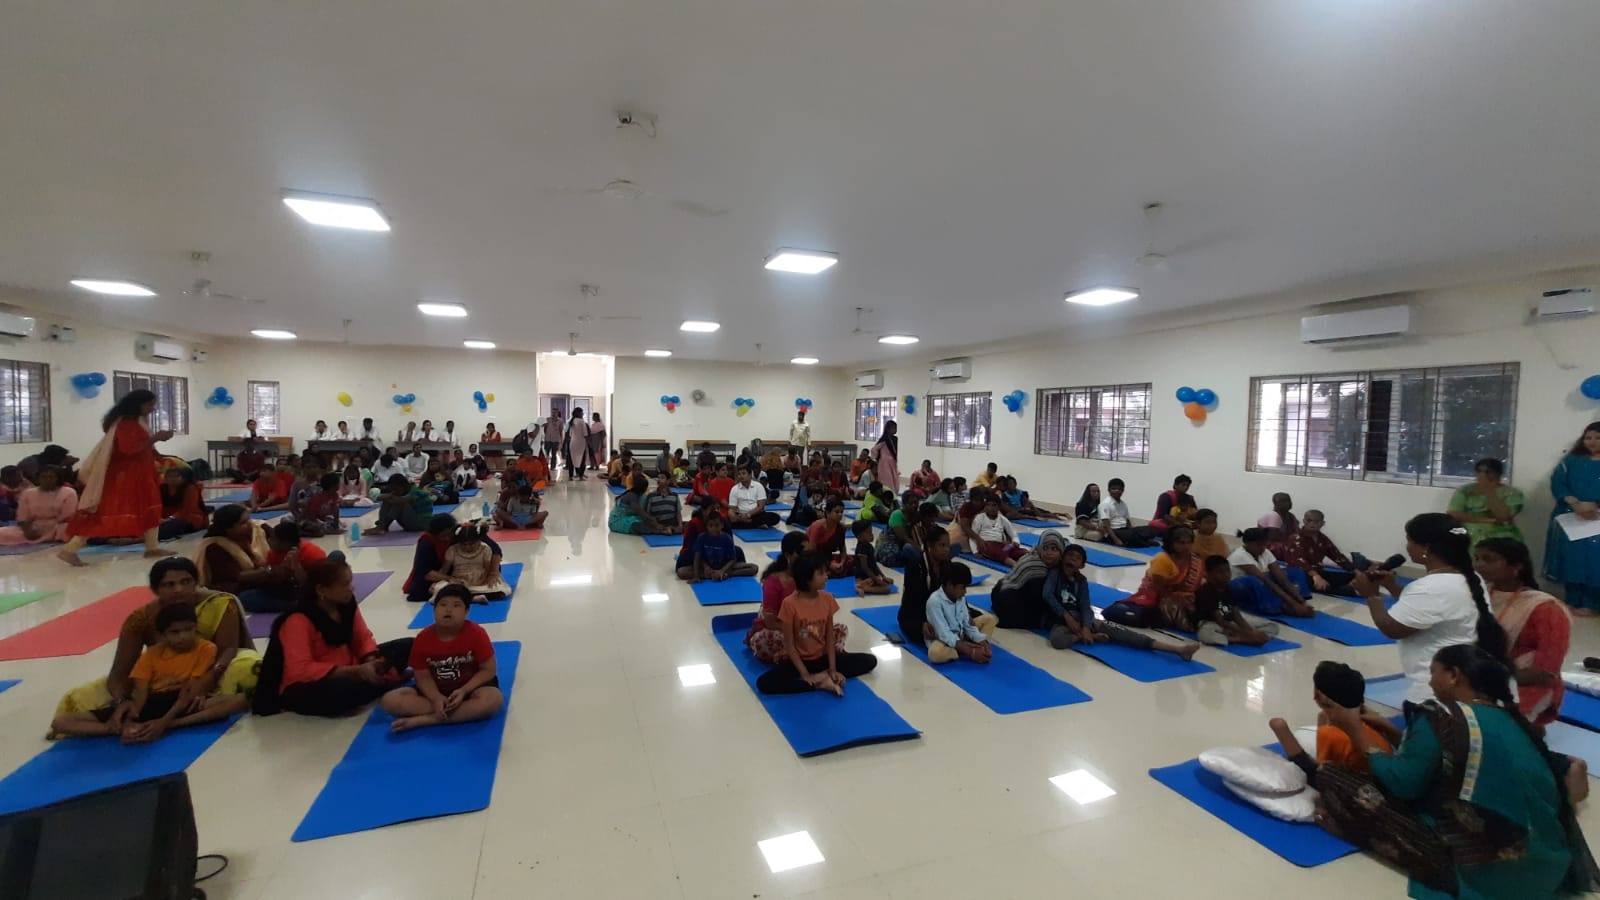 Persons with Disabilities Performing various Yoga postures